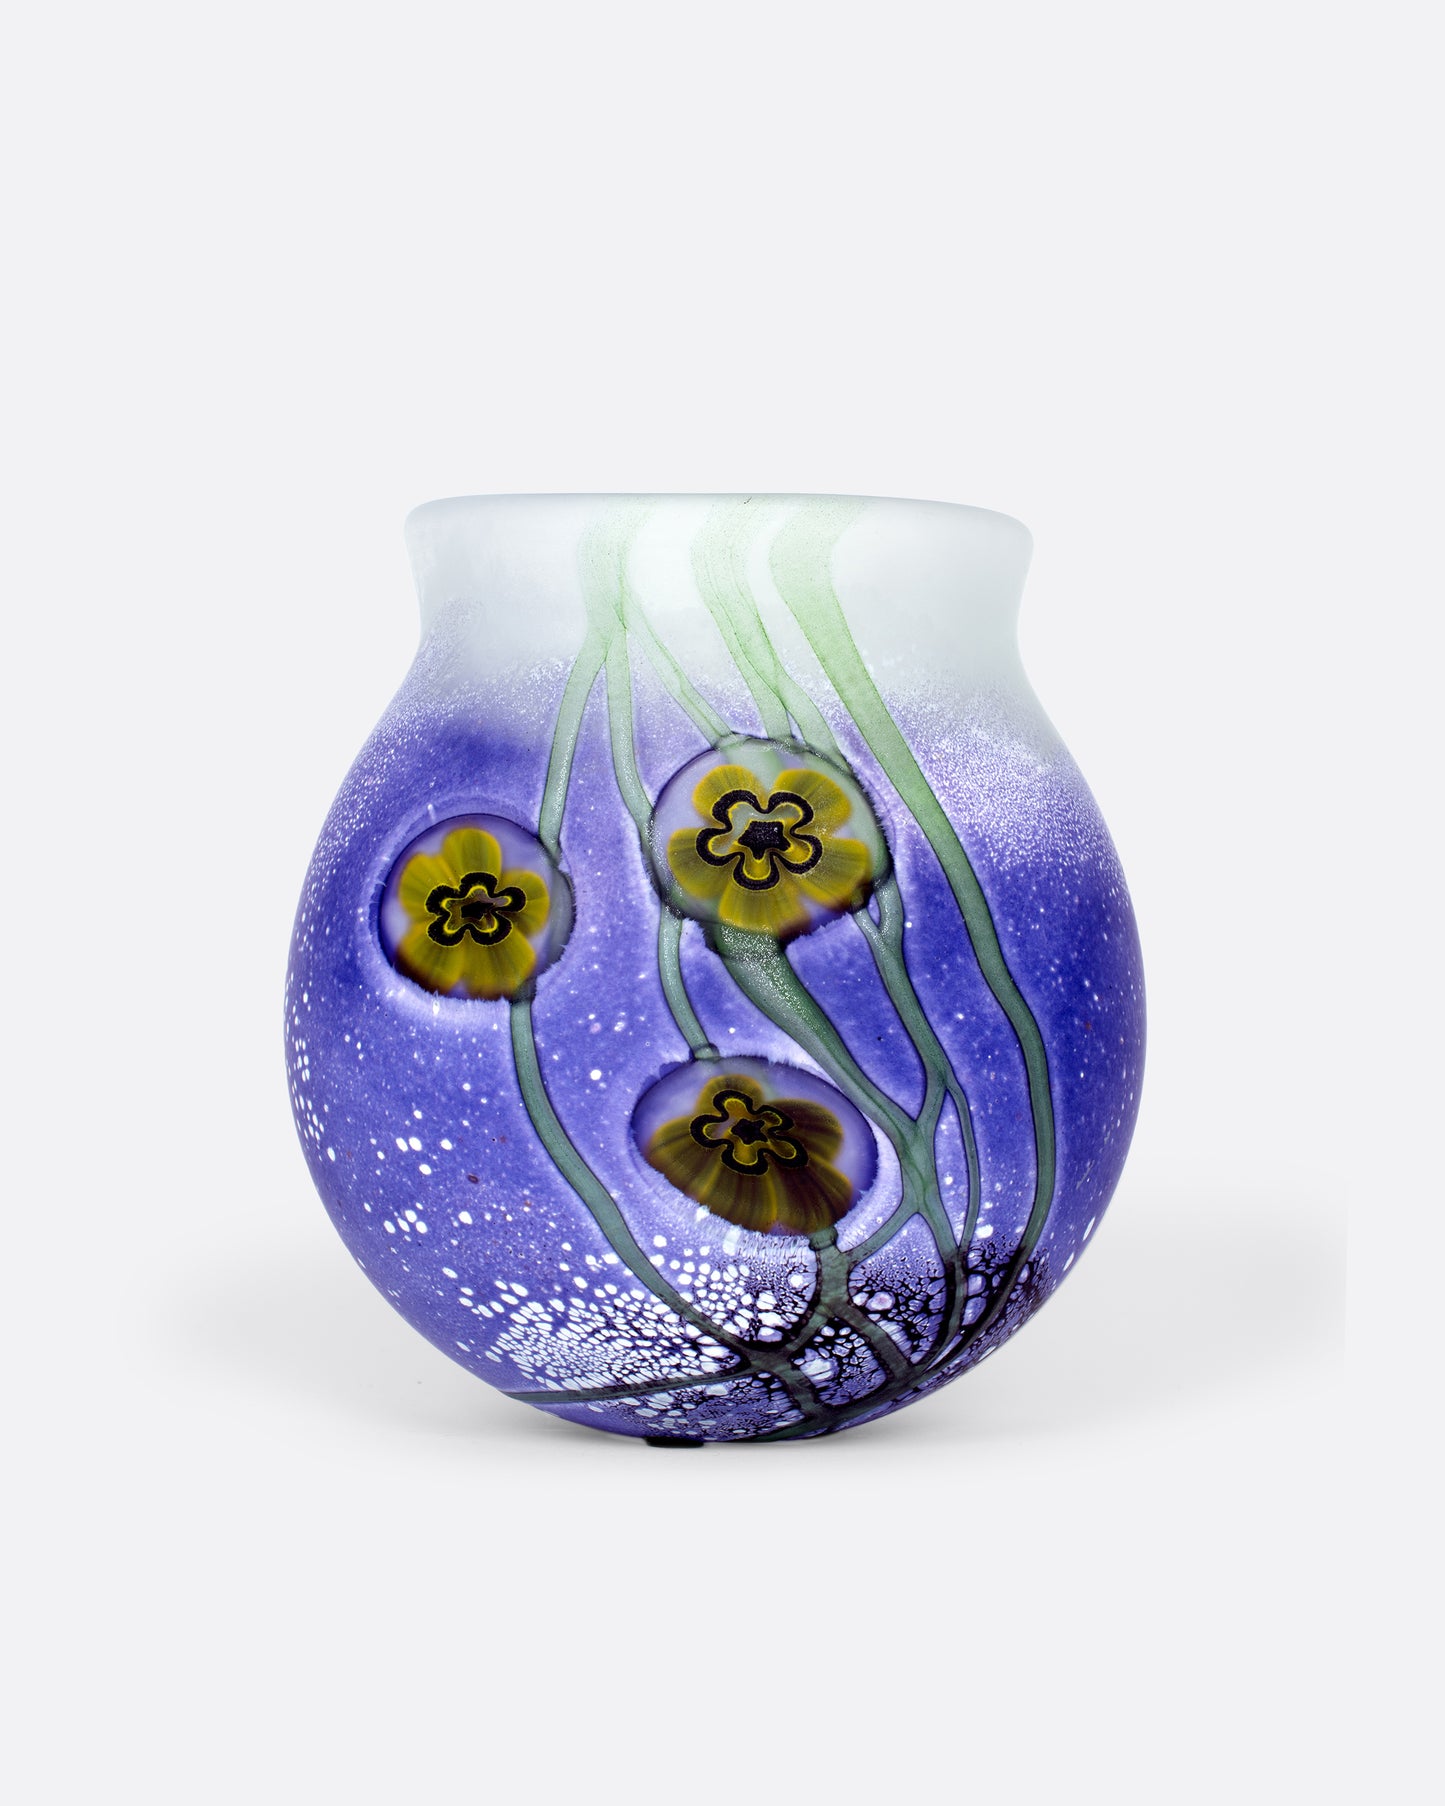 This heavy, frosted glass vase is mesmerizing from every angle.